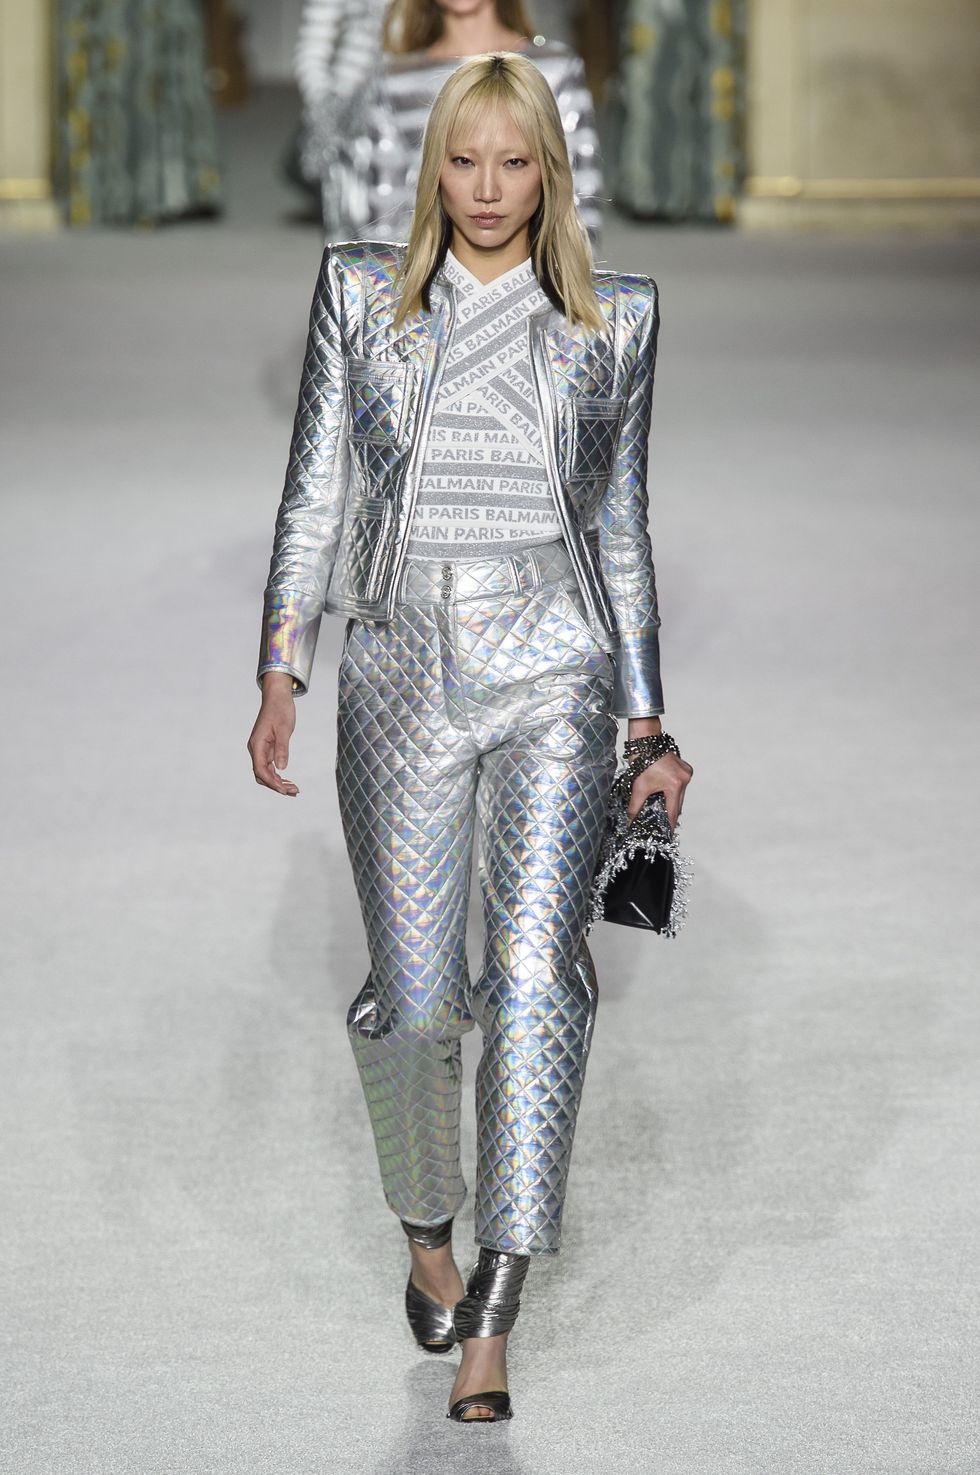 Fashion model, Fashion, Fashion show, Runway, Clothing, Haute couture, Blond, Silver, Transparent material, Outerwear, 